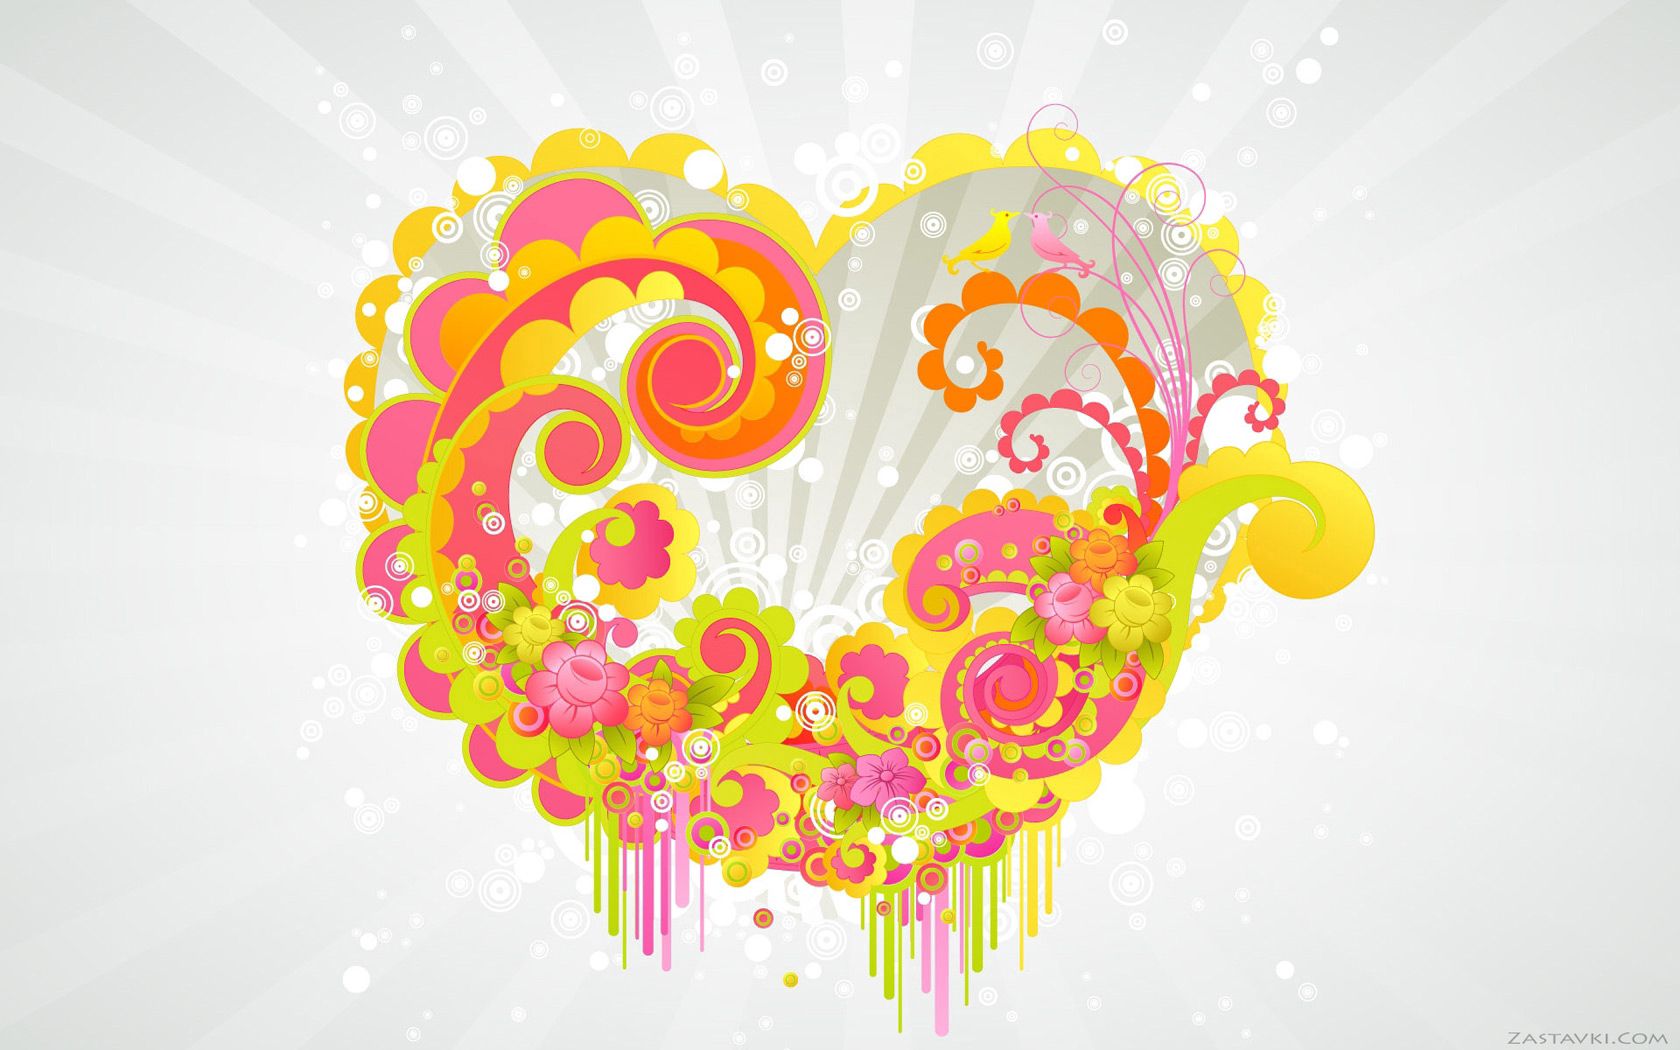 Phone Wallpaper patterns, love, heart, colorful